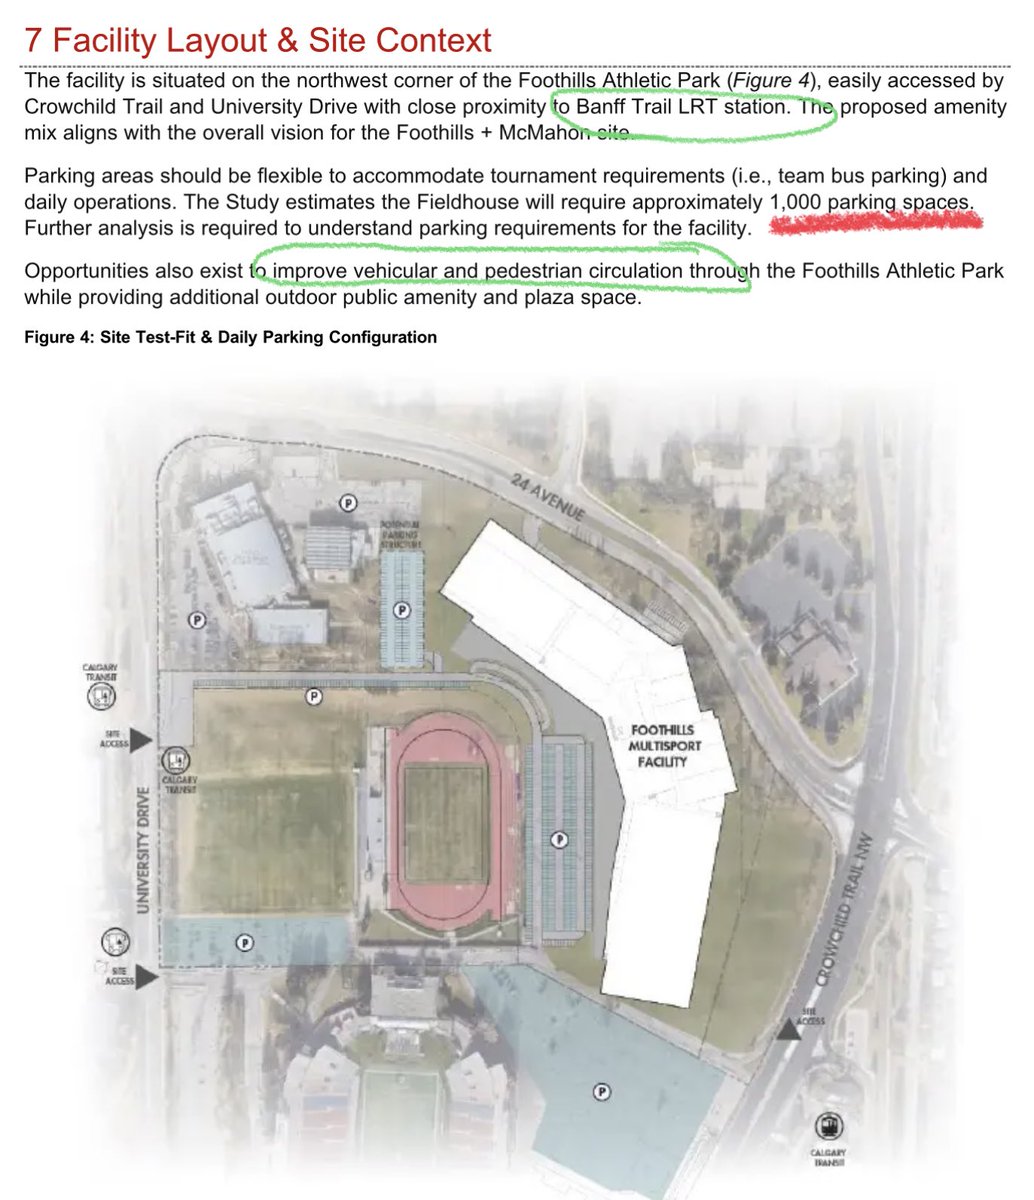 The Amenity Refinement Study for Calgary’s new Field House calls for 1,000 parking stalls
It mentions the LRT station nearby and vaguely talks about improving pedestrian circulation.
Why doesn’t it specifically call out making it easy to walk to the LRT?
@jasmine_mian